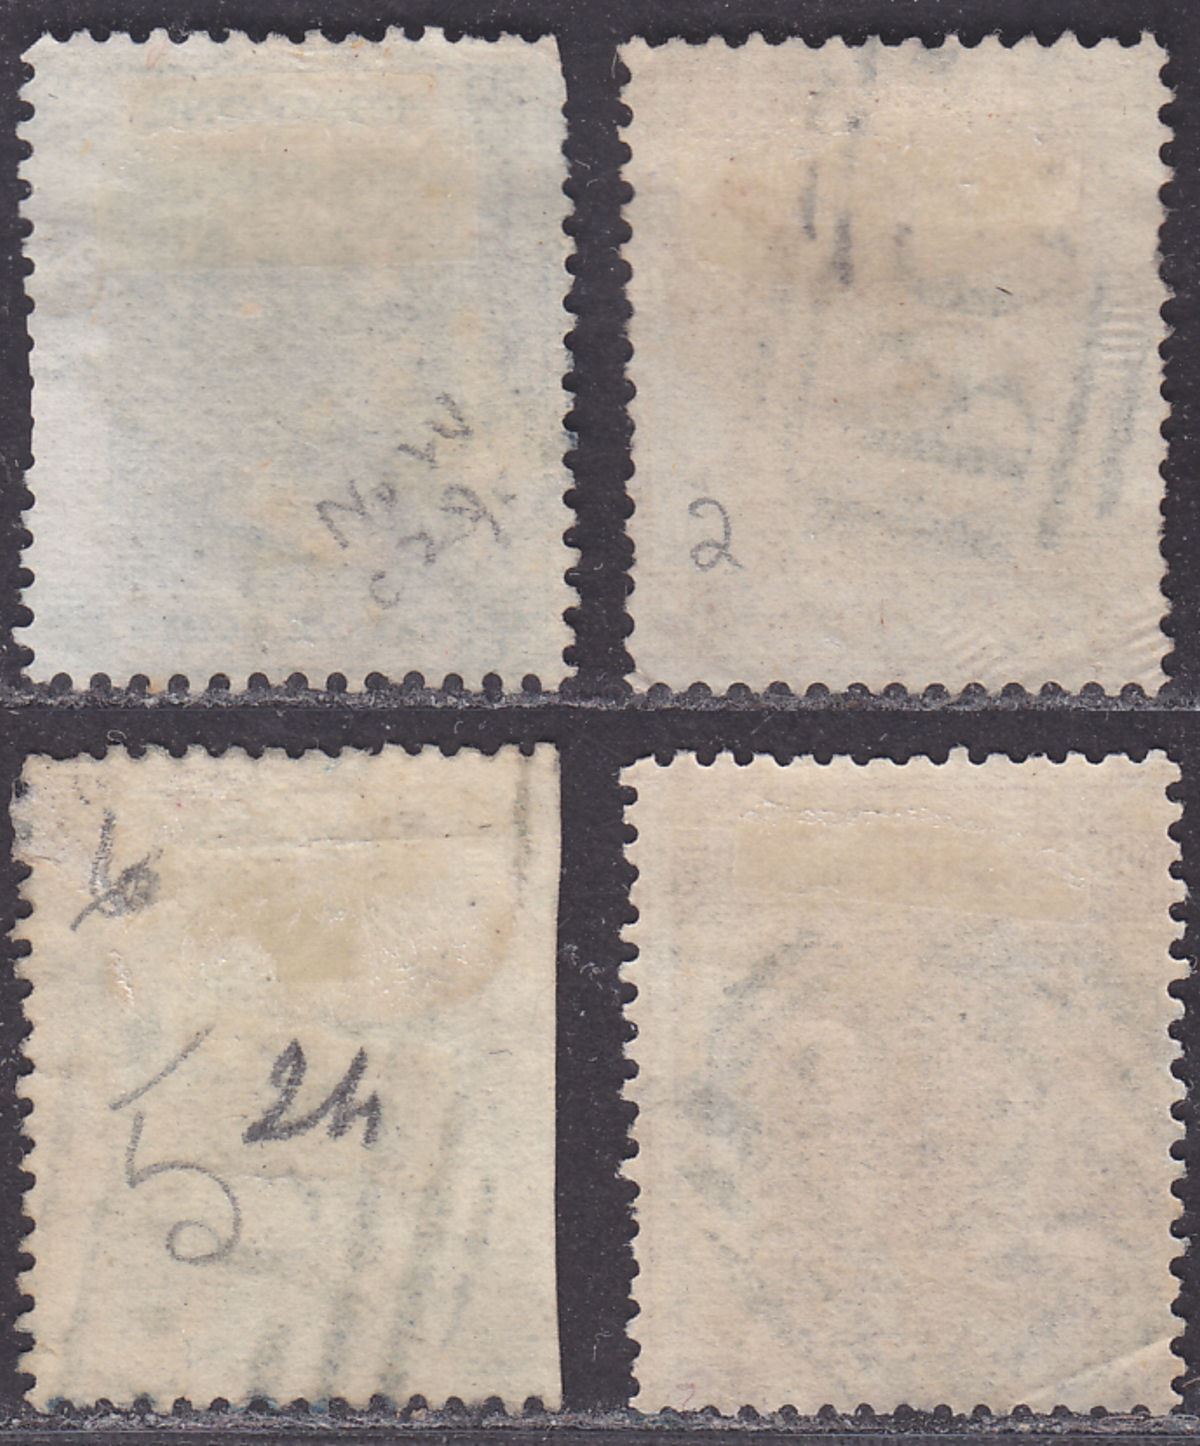 Hong Kong 1862 QV Unwatermarked Selection to 24c Used w B62 Postmarks cat £320